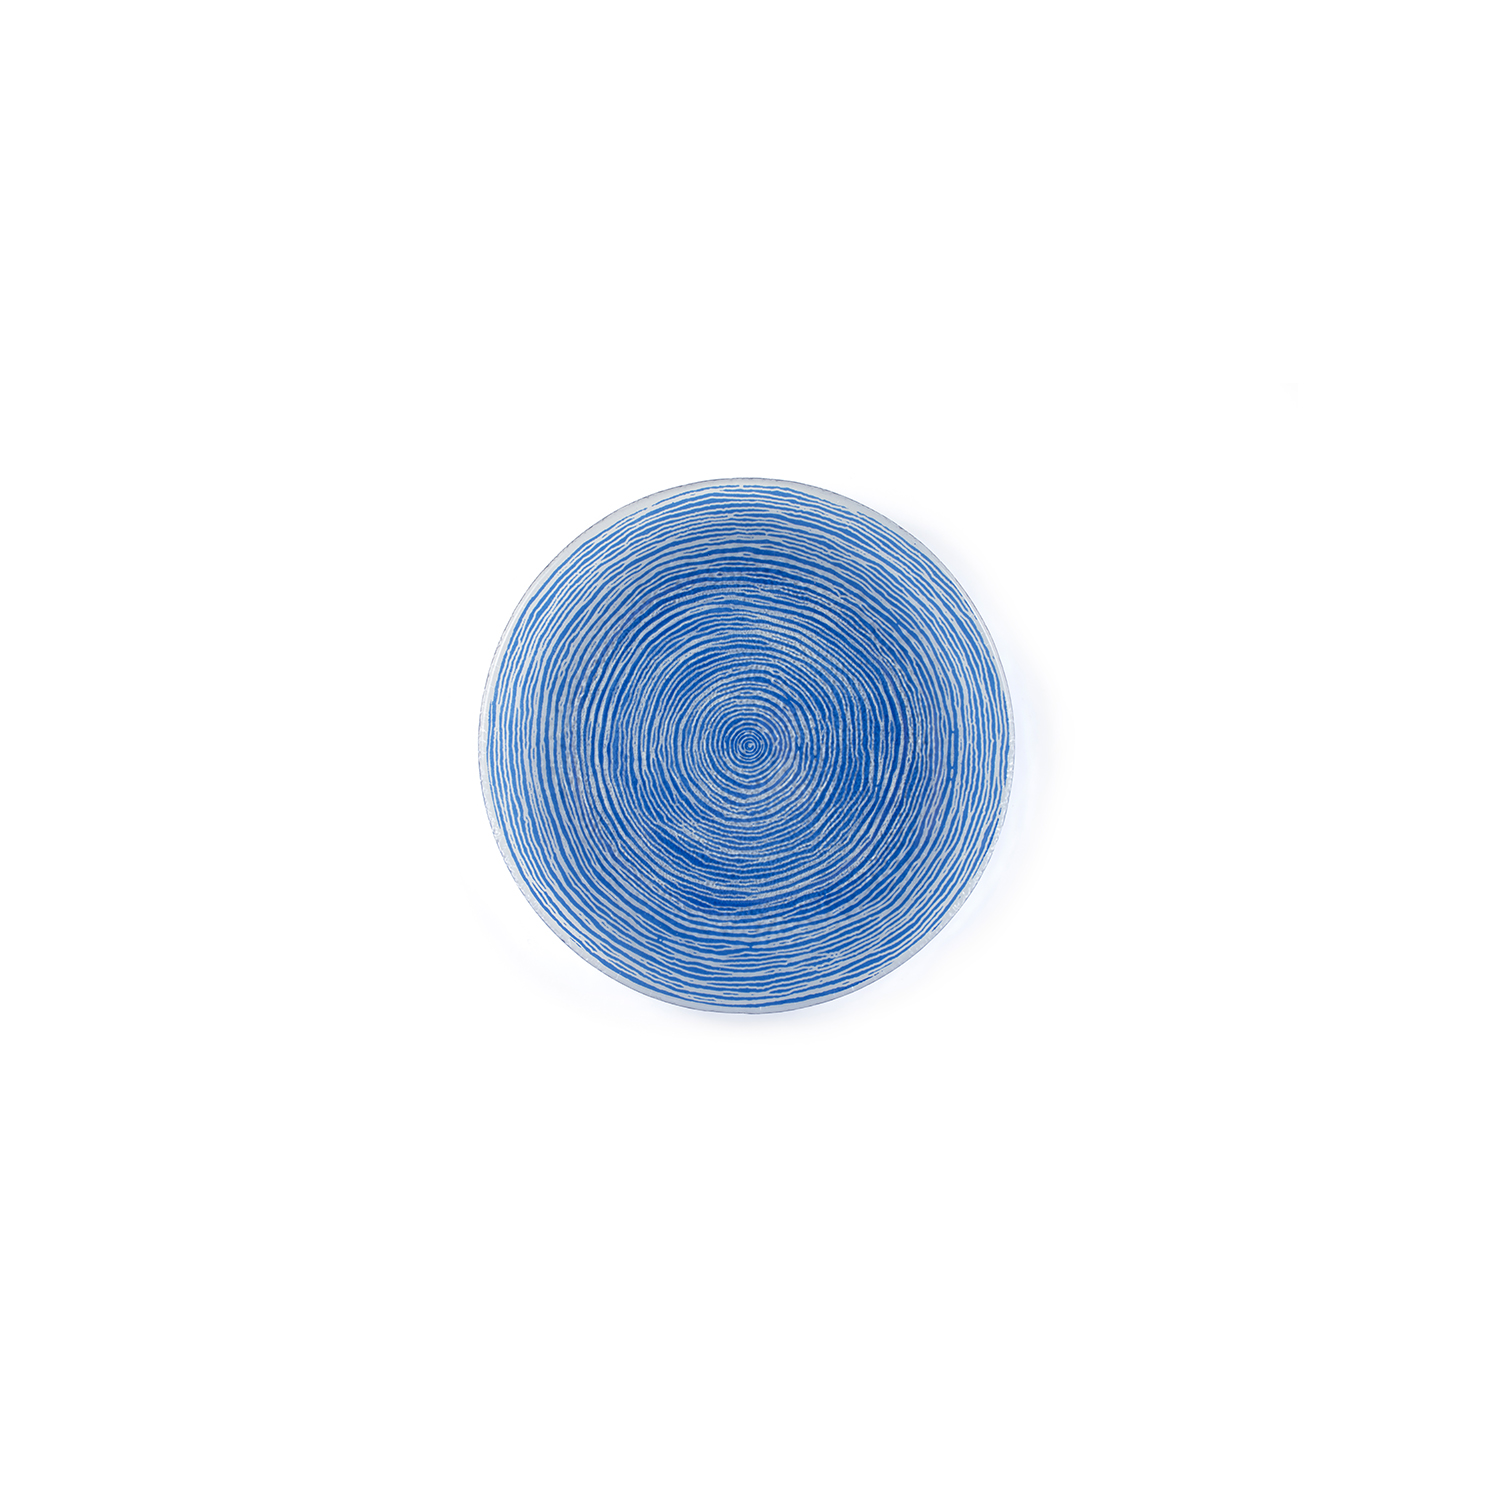 Fusion Glass Plate Cobalt Round 7.75″ x 7.75″ x 0.5″  CasePack:12